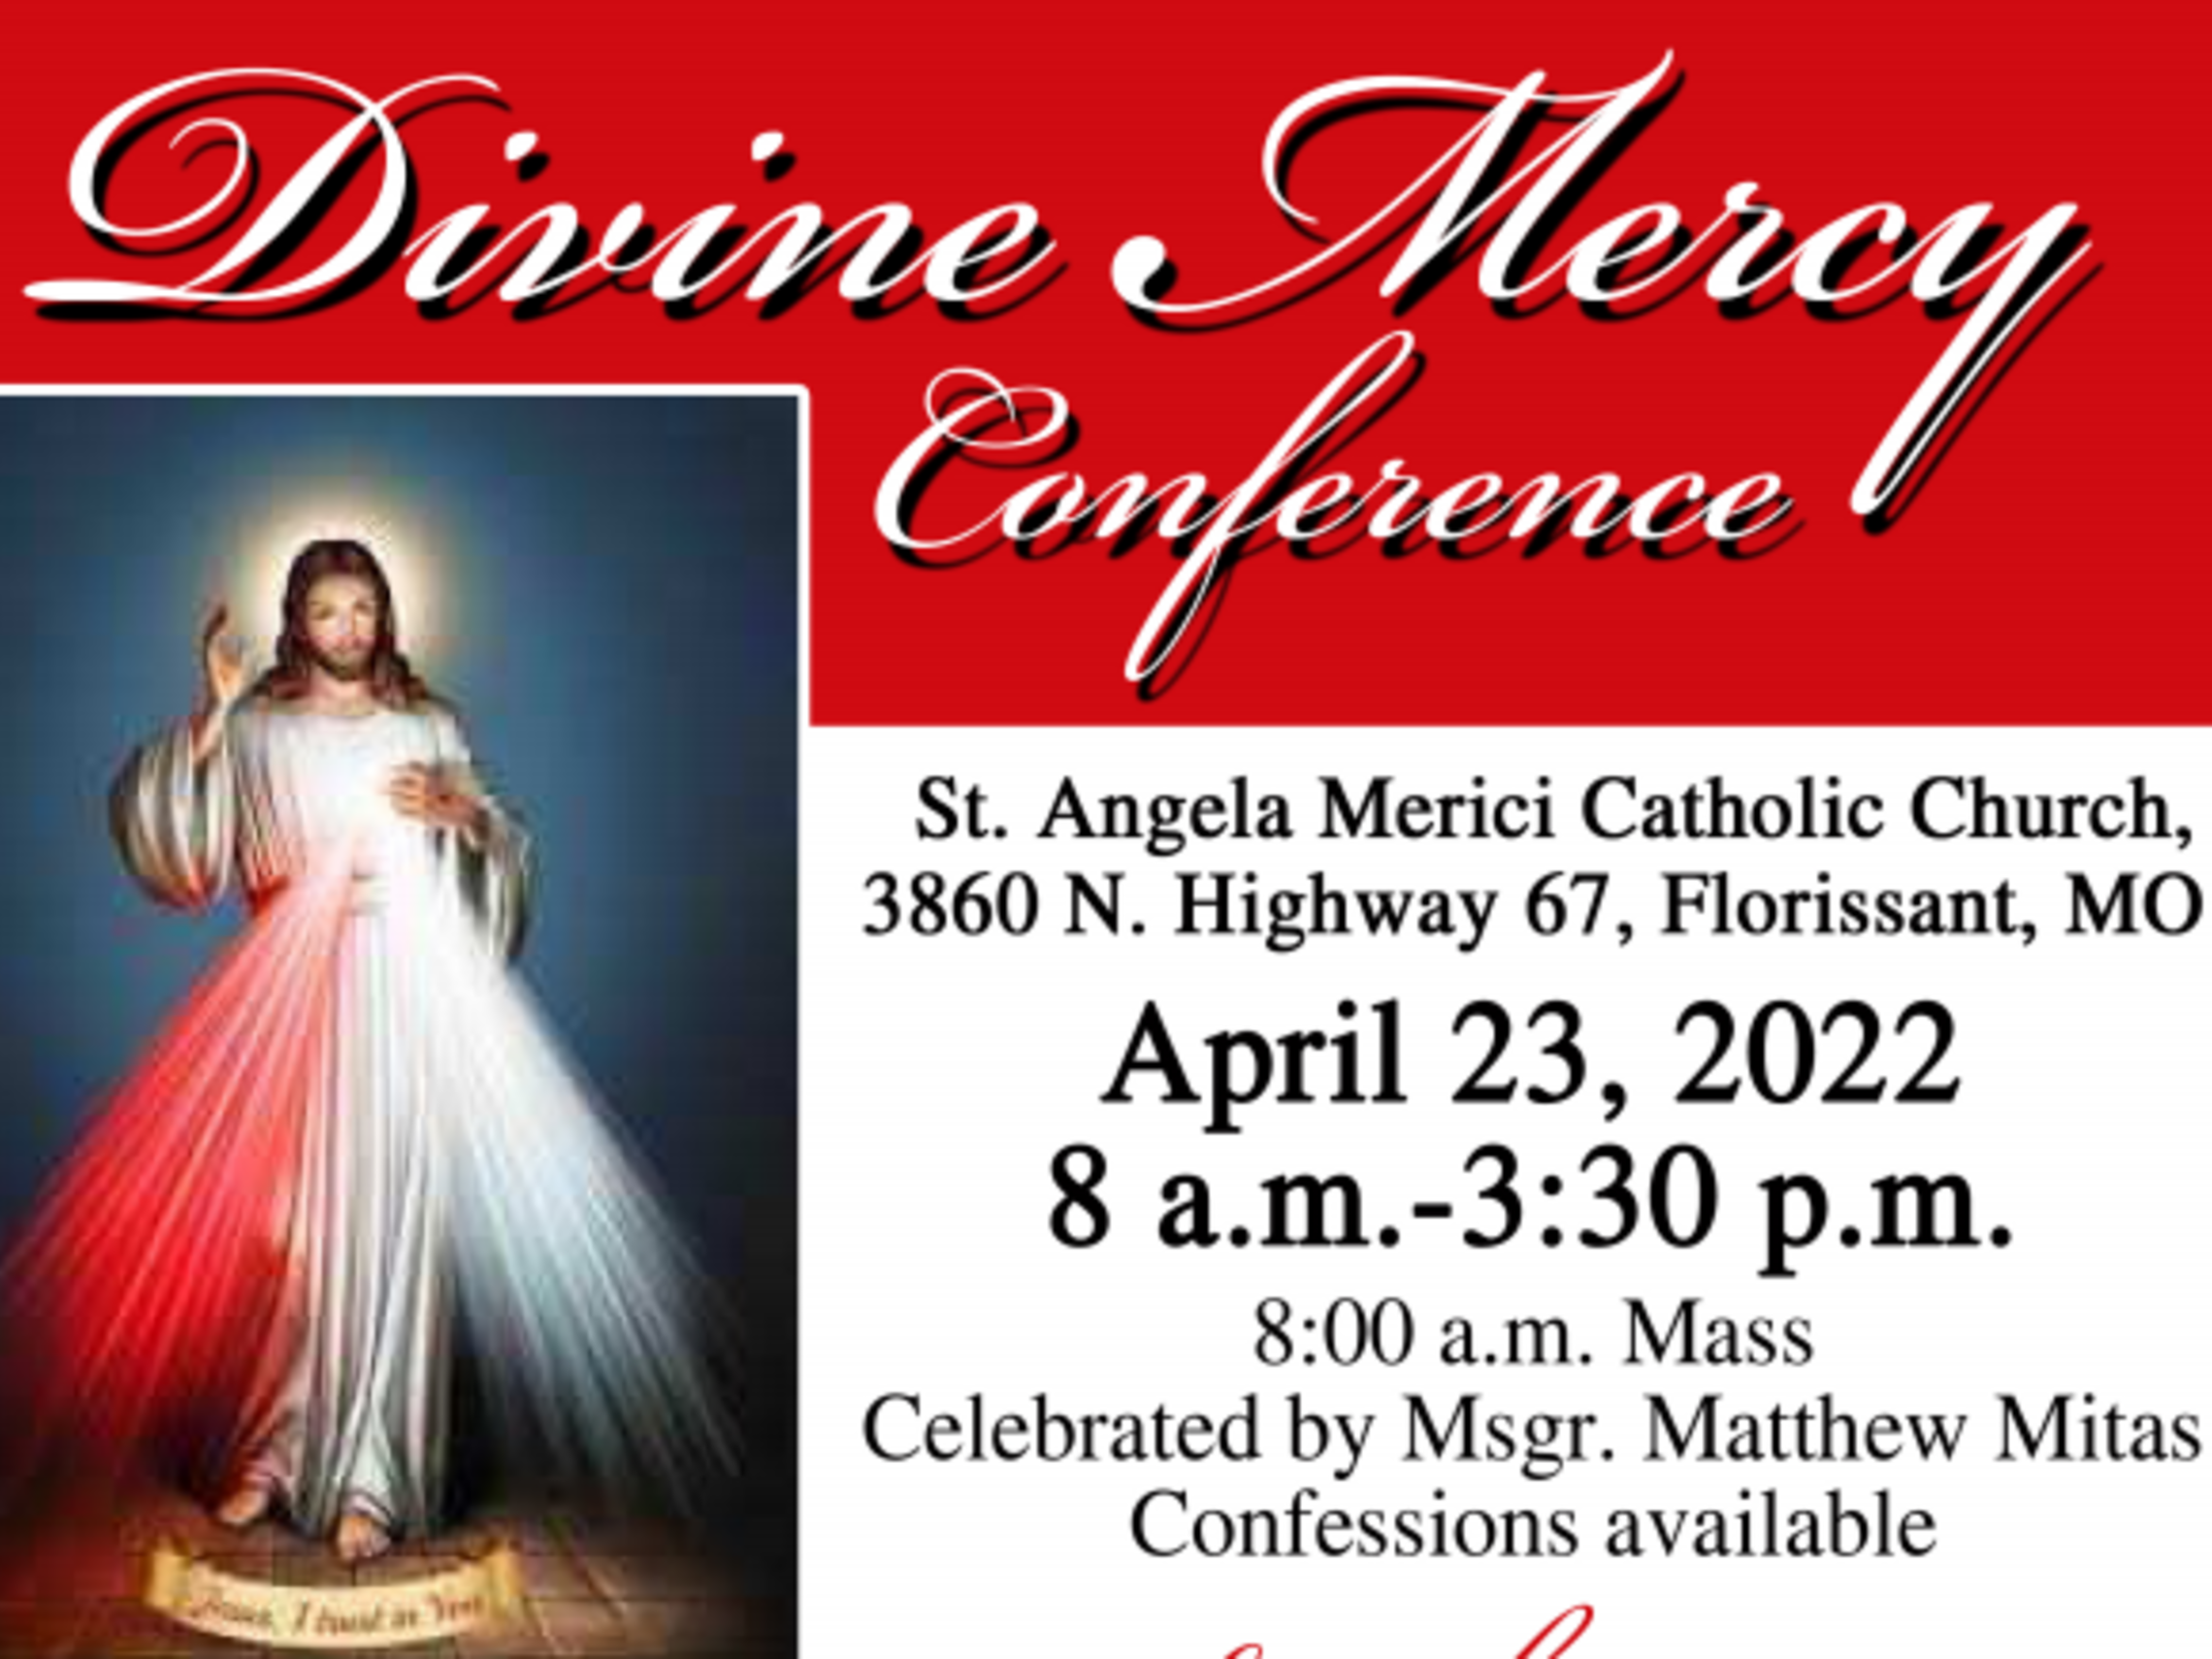 Divine Mercyy Conference